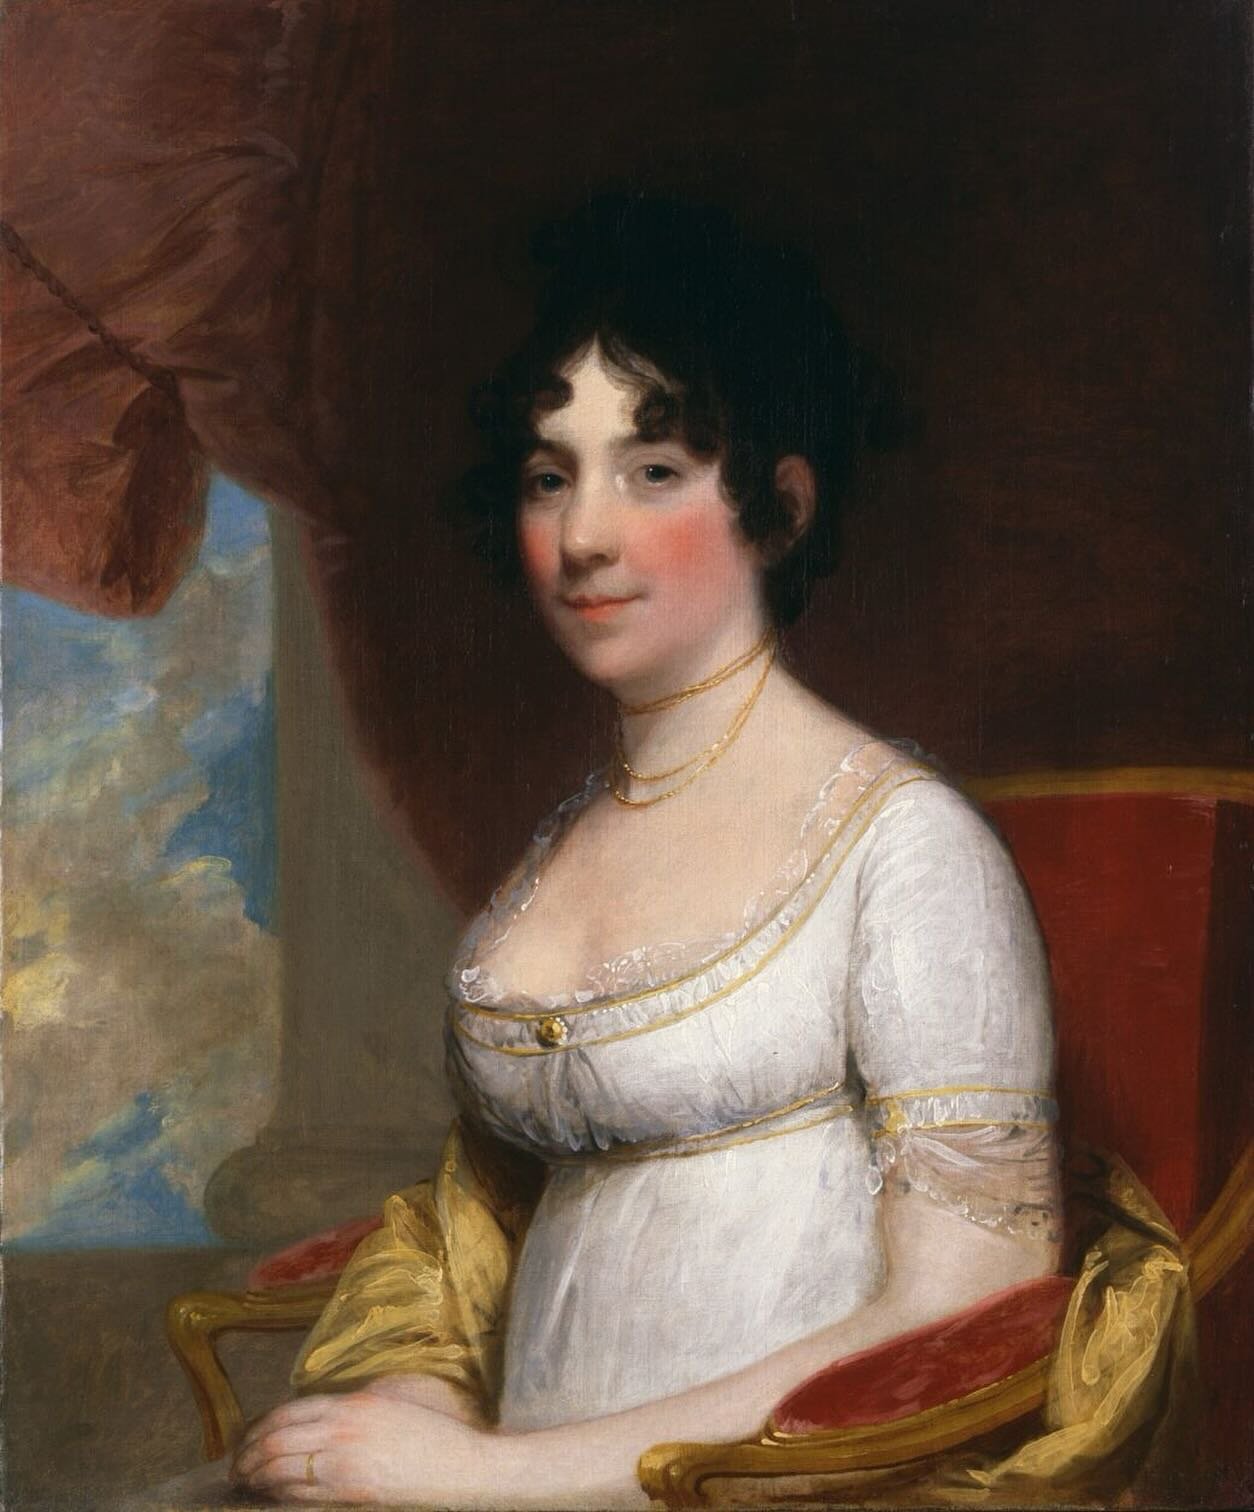 A consummate hostess and the fourth First Lady, Dolley Madison is our trivia muse this week! Join us Friday, May 17 at 7 p.m. for trivia at the farm, a smart soir&eacute;e Dolley would surely endorse.